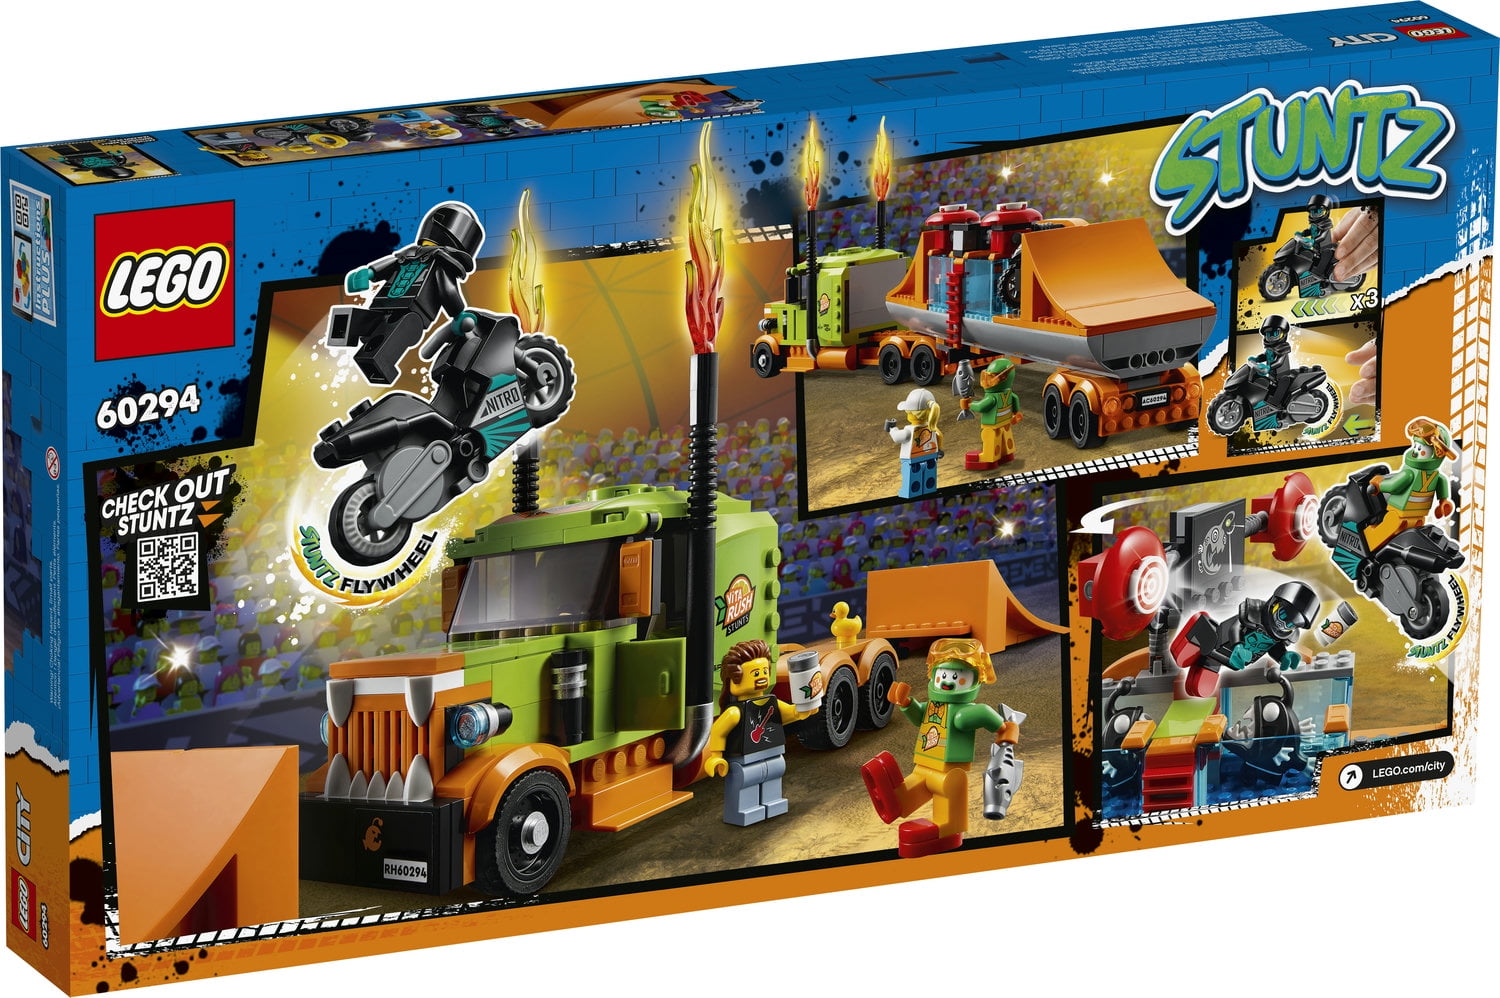 Four new LEGO CITY Stuntz sets have been delayed online